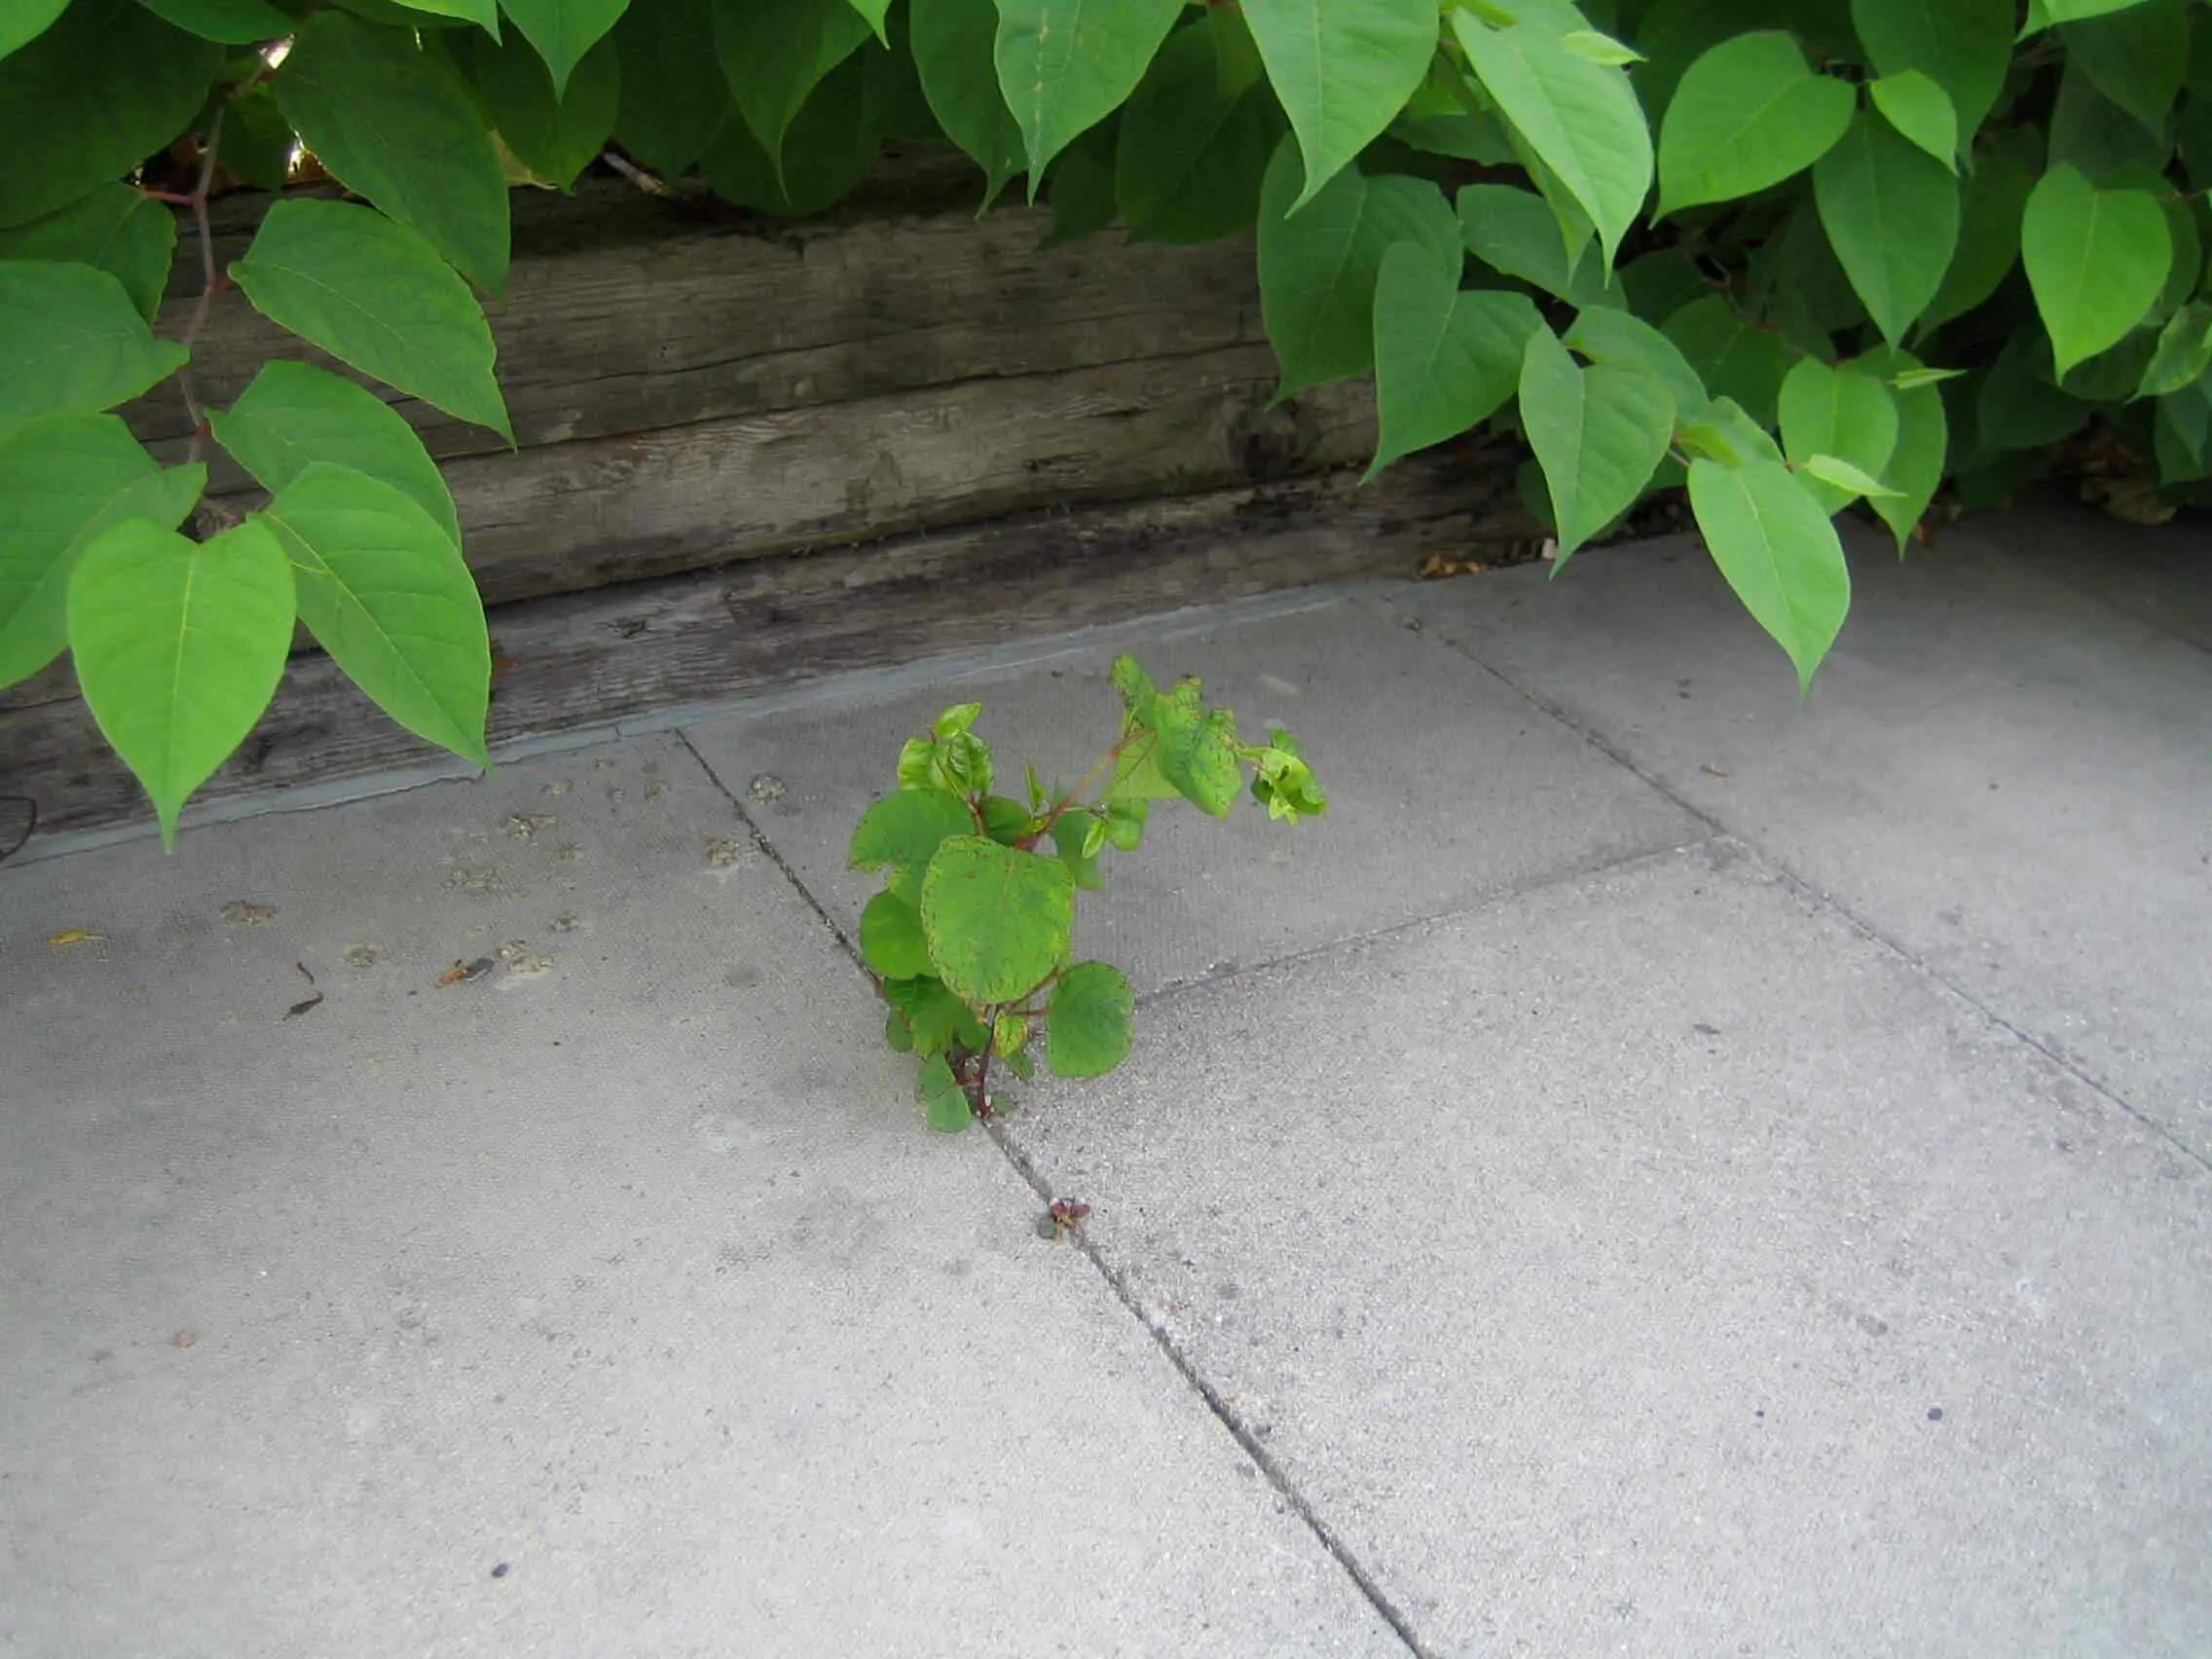 No gap is too small for Japanese knotweed damage to occur